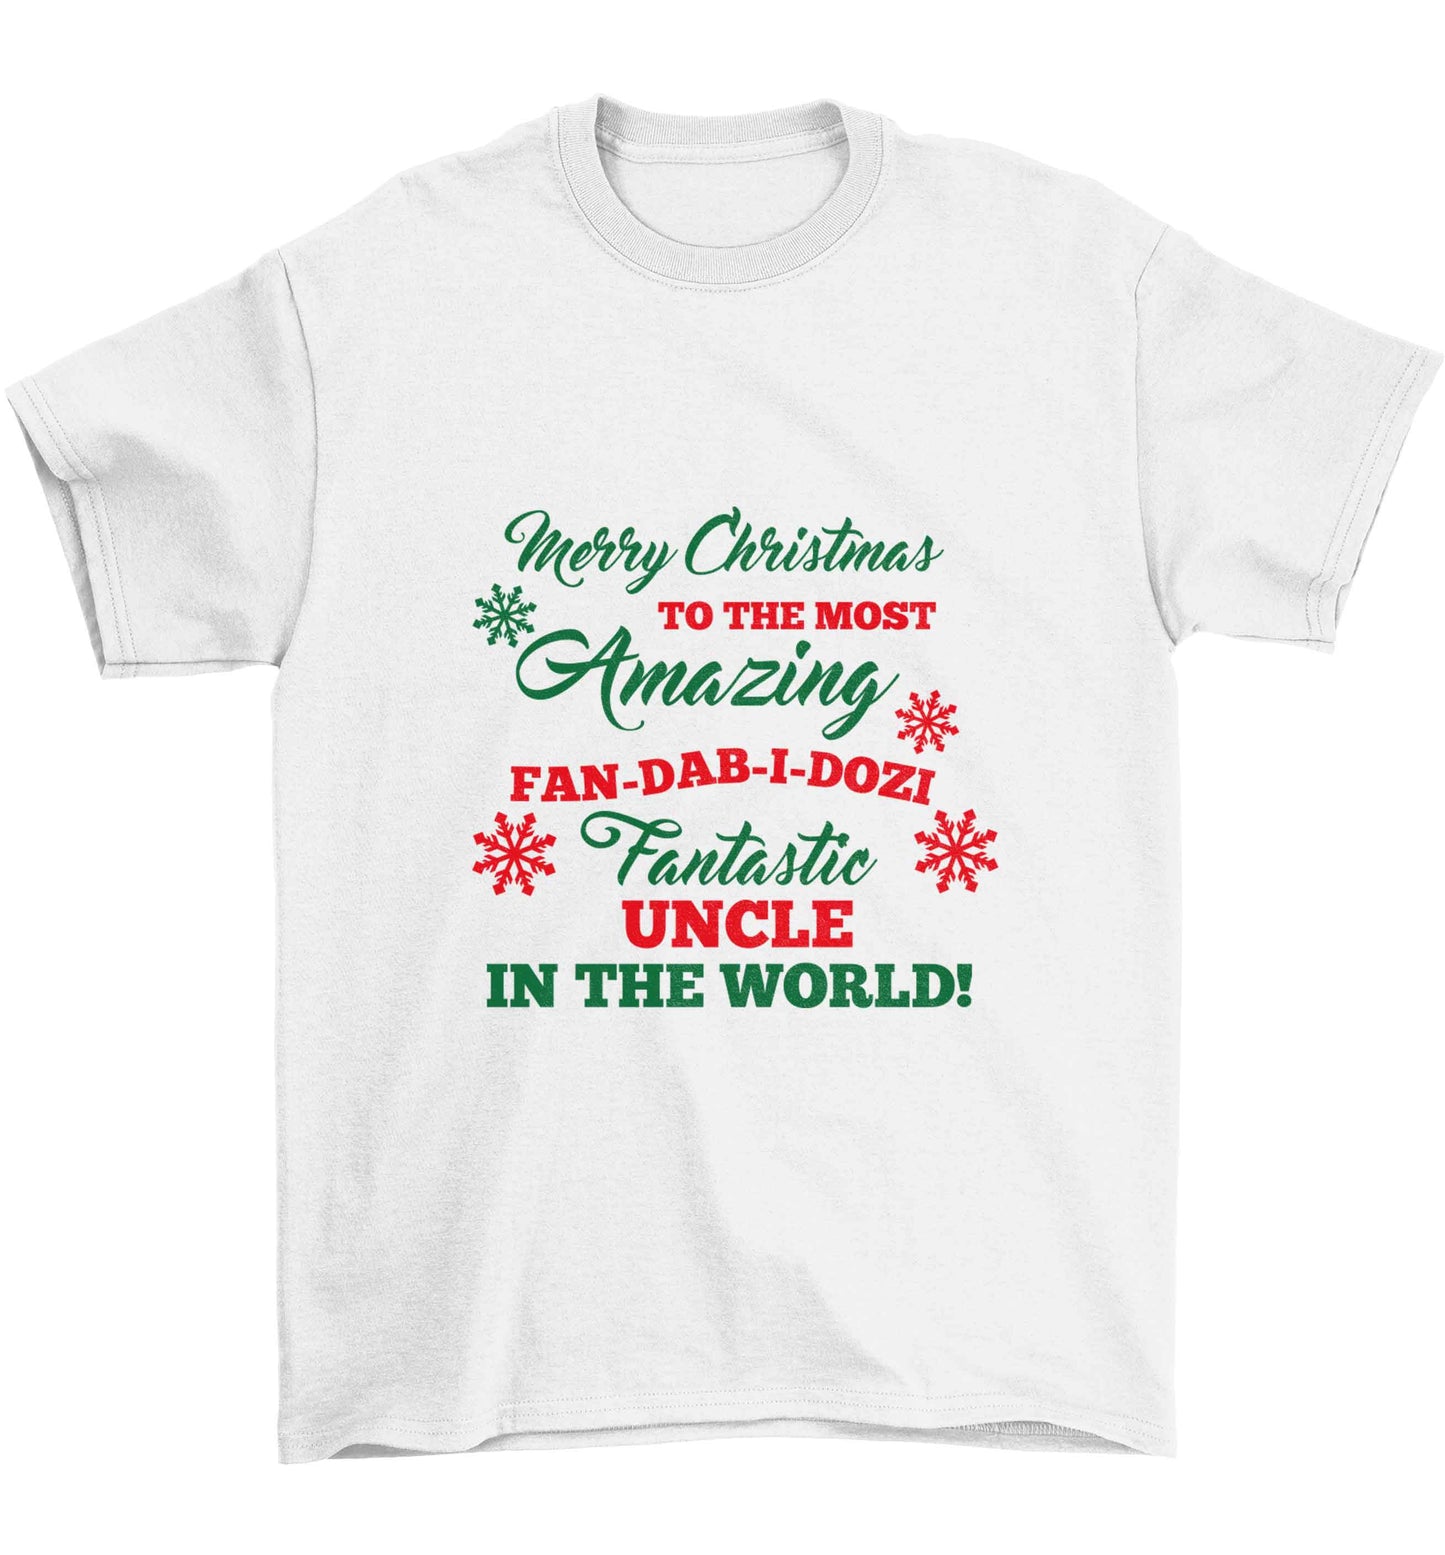 Merry Christmas to the most amazing fan-dab-i-dozi fantasic Uncle in the world Children's white Tshirt 12-13 Years